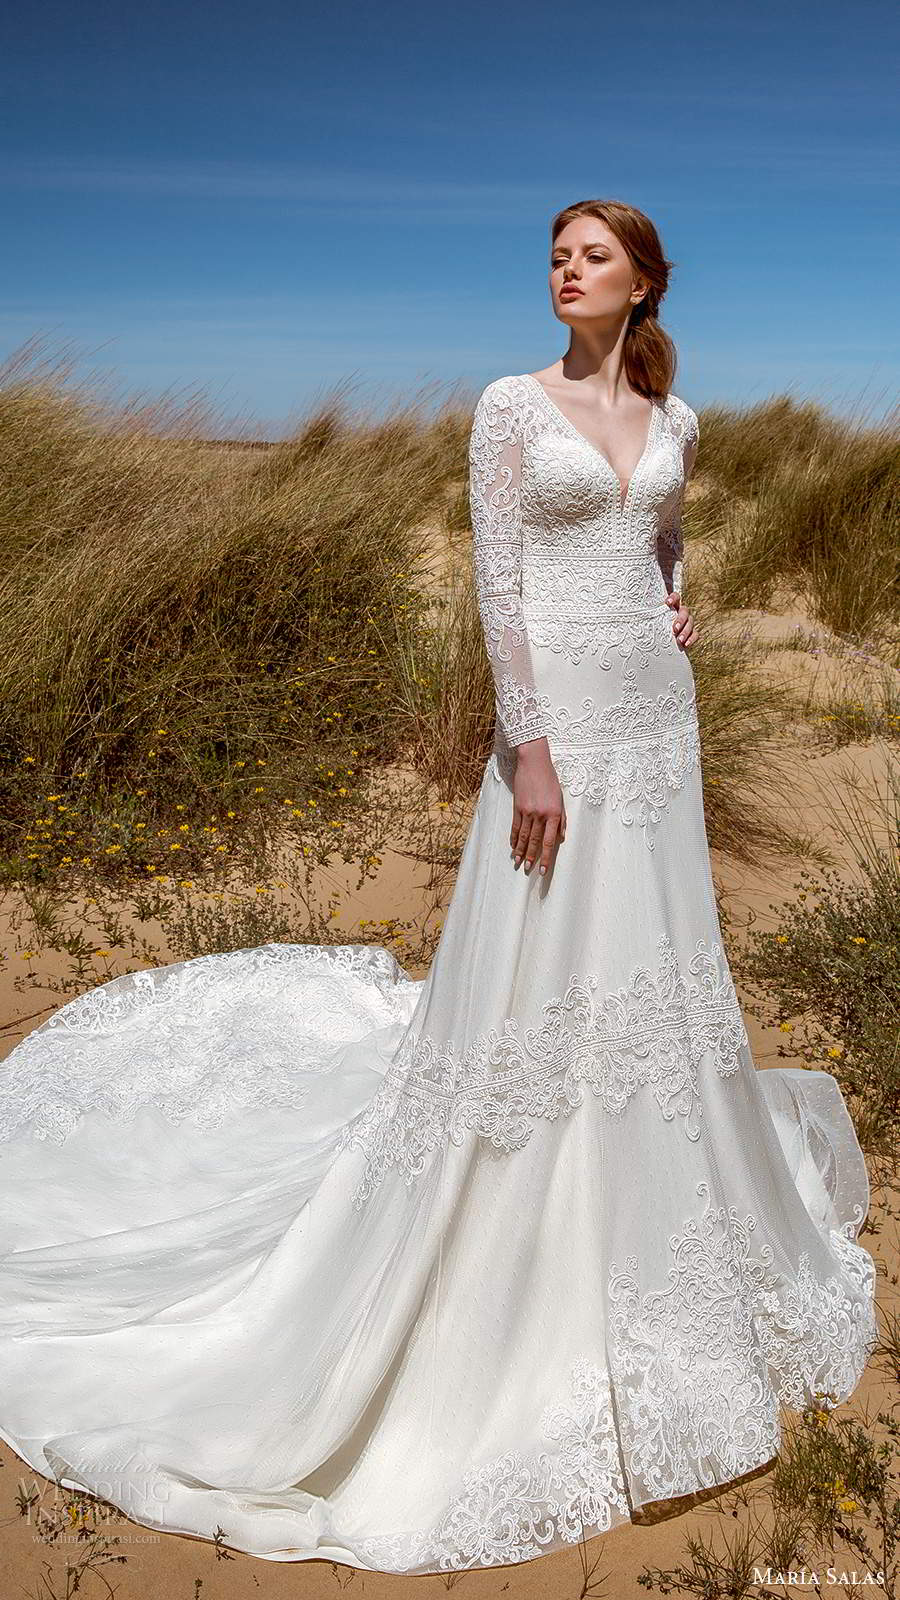 maria salas 2019 bridal long sleeves plunging v neckline fully embellished lace a line ball gown wedding dress chapel train (18) mv